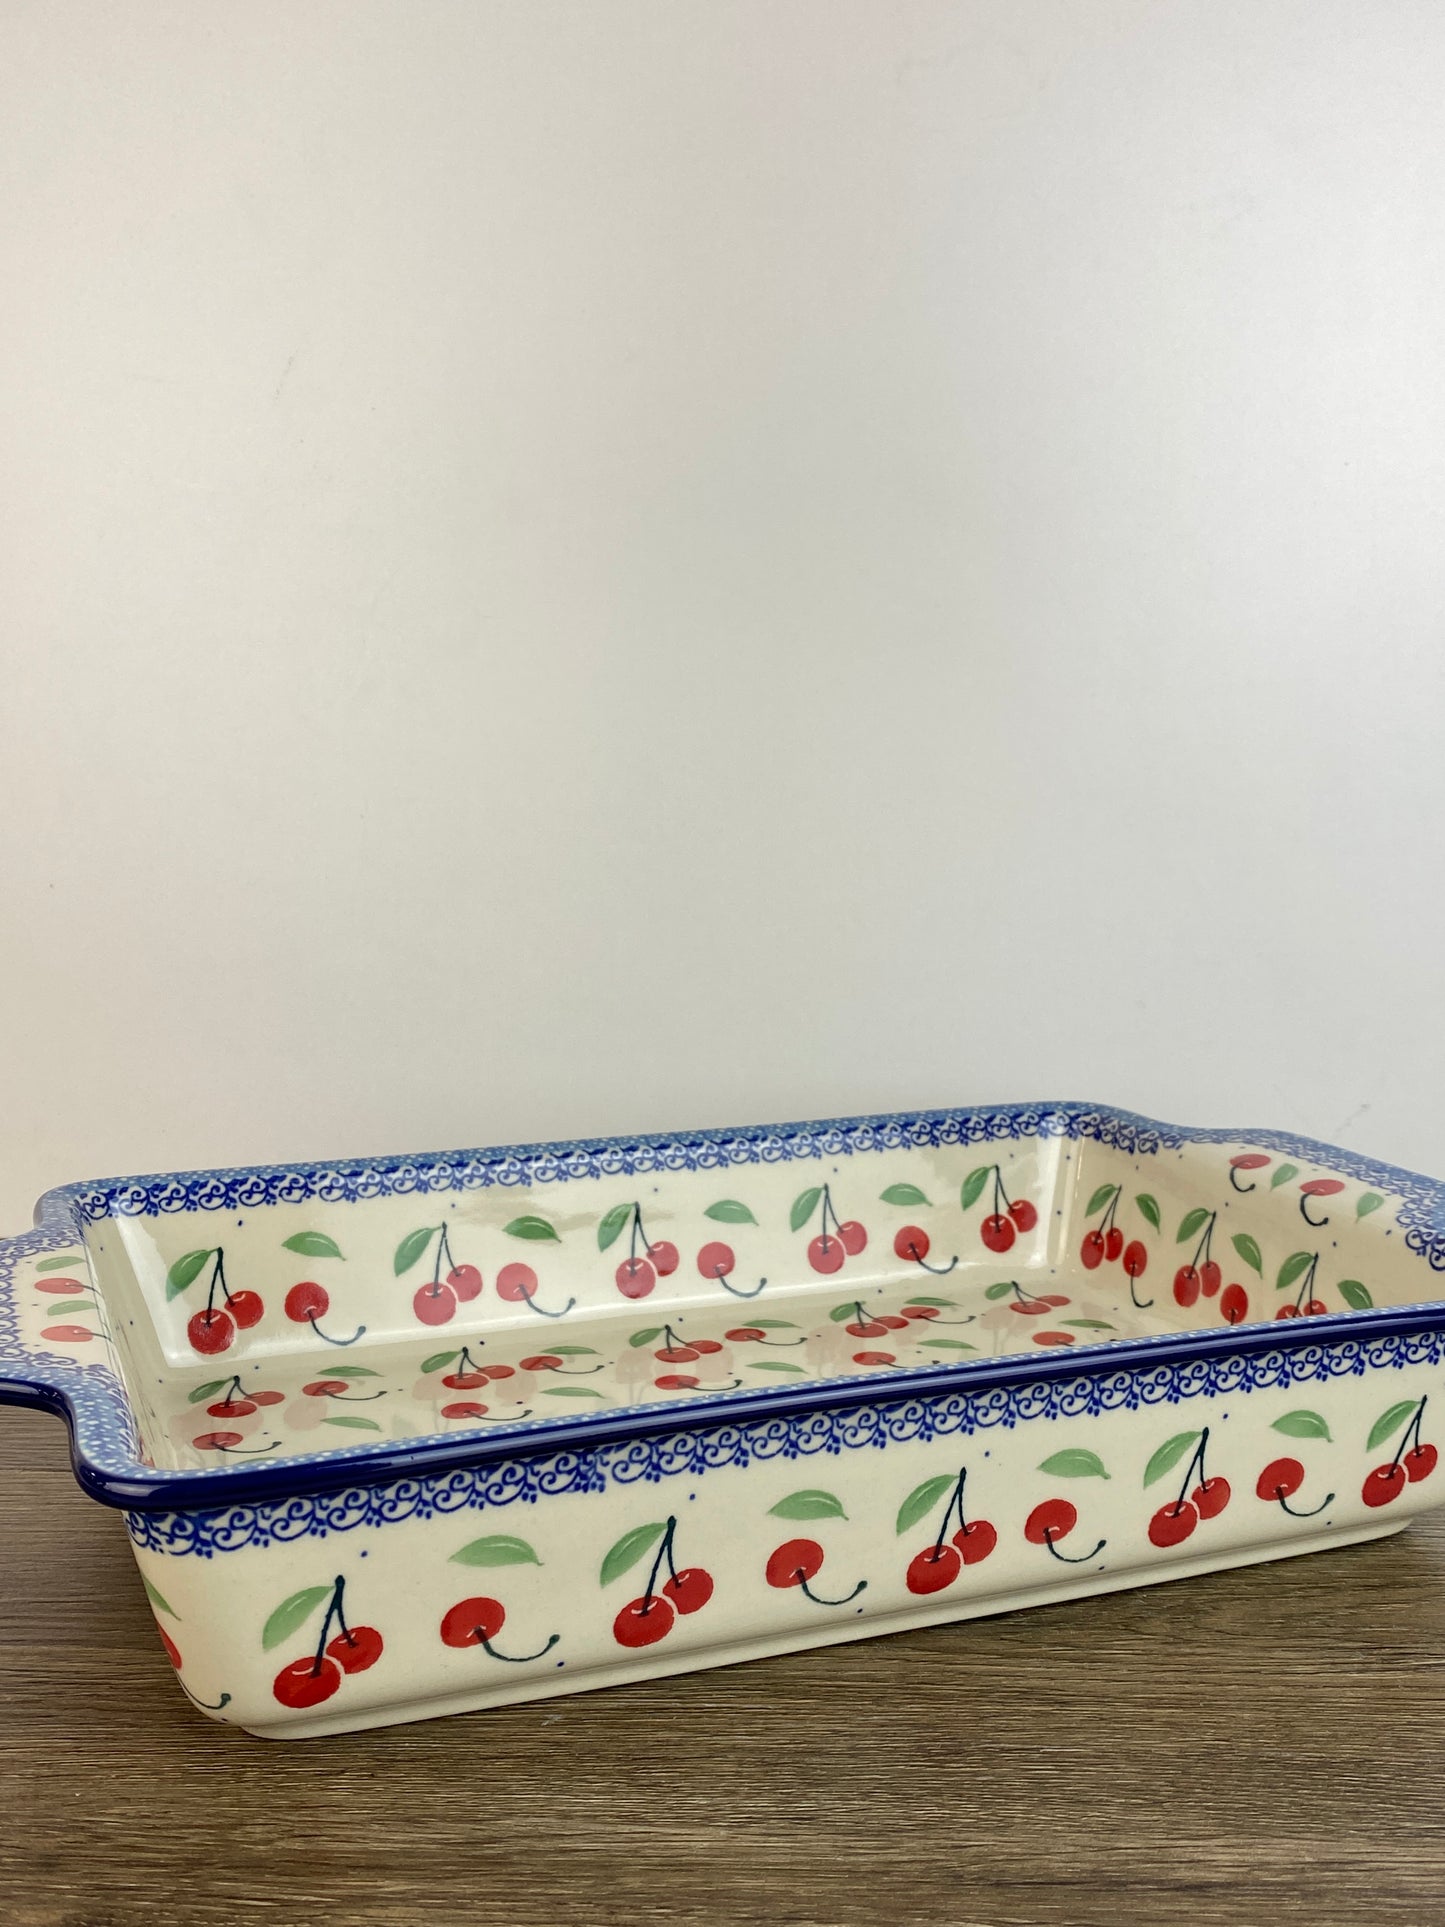 Large Rectangular Baker with Handles - Shape A56 - Pattern 2715